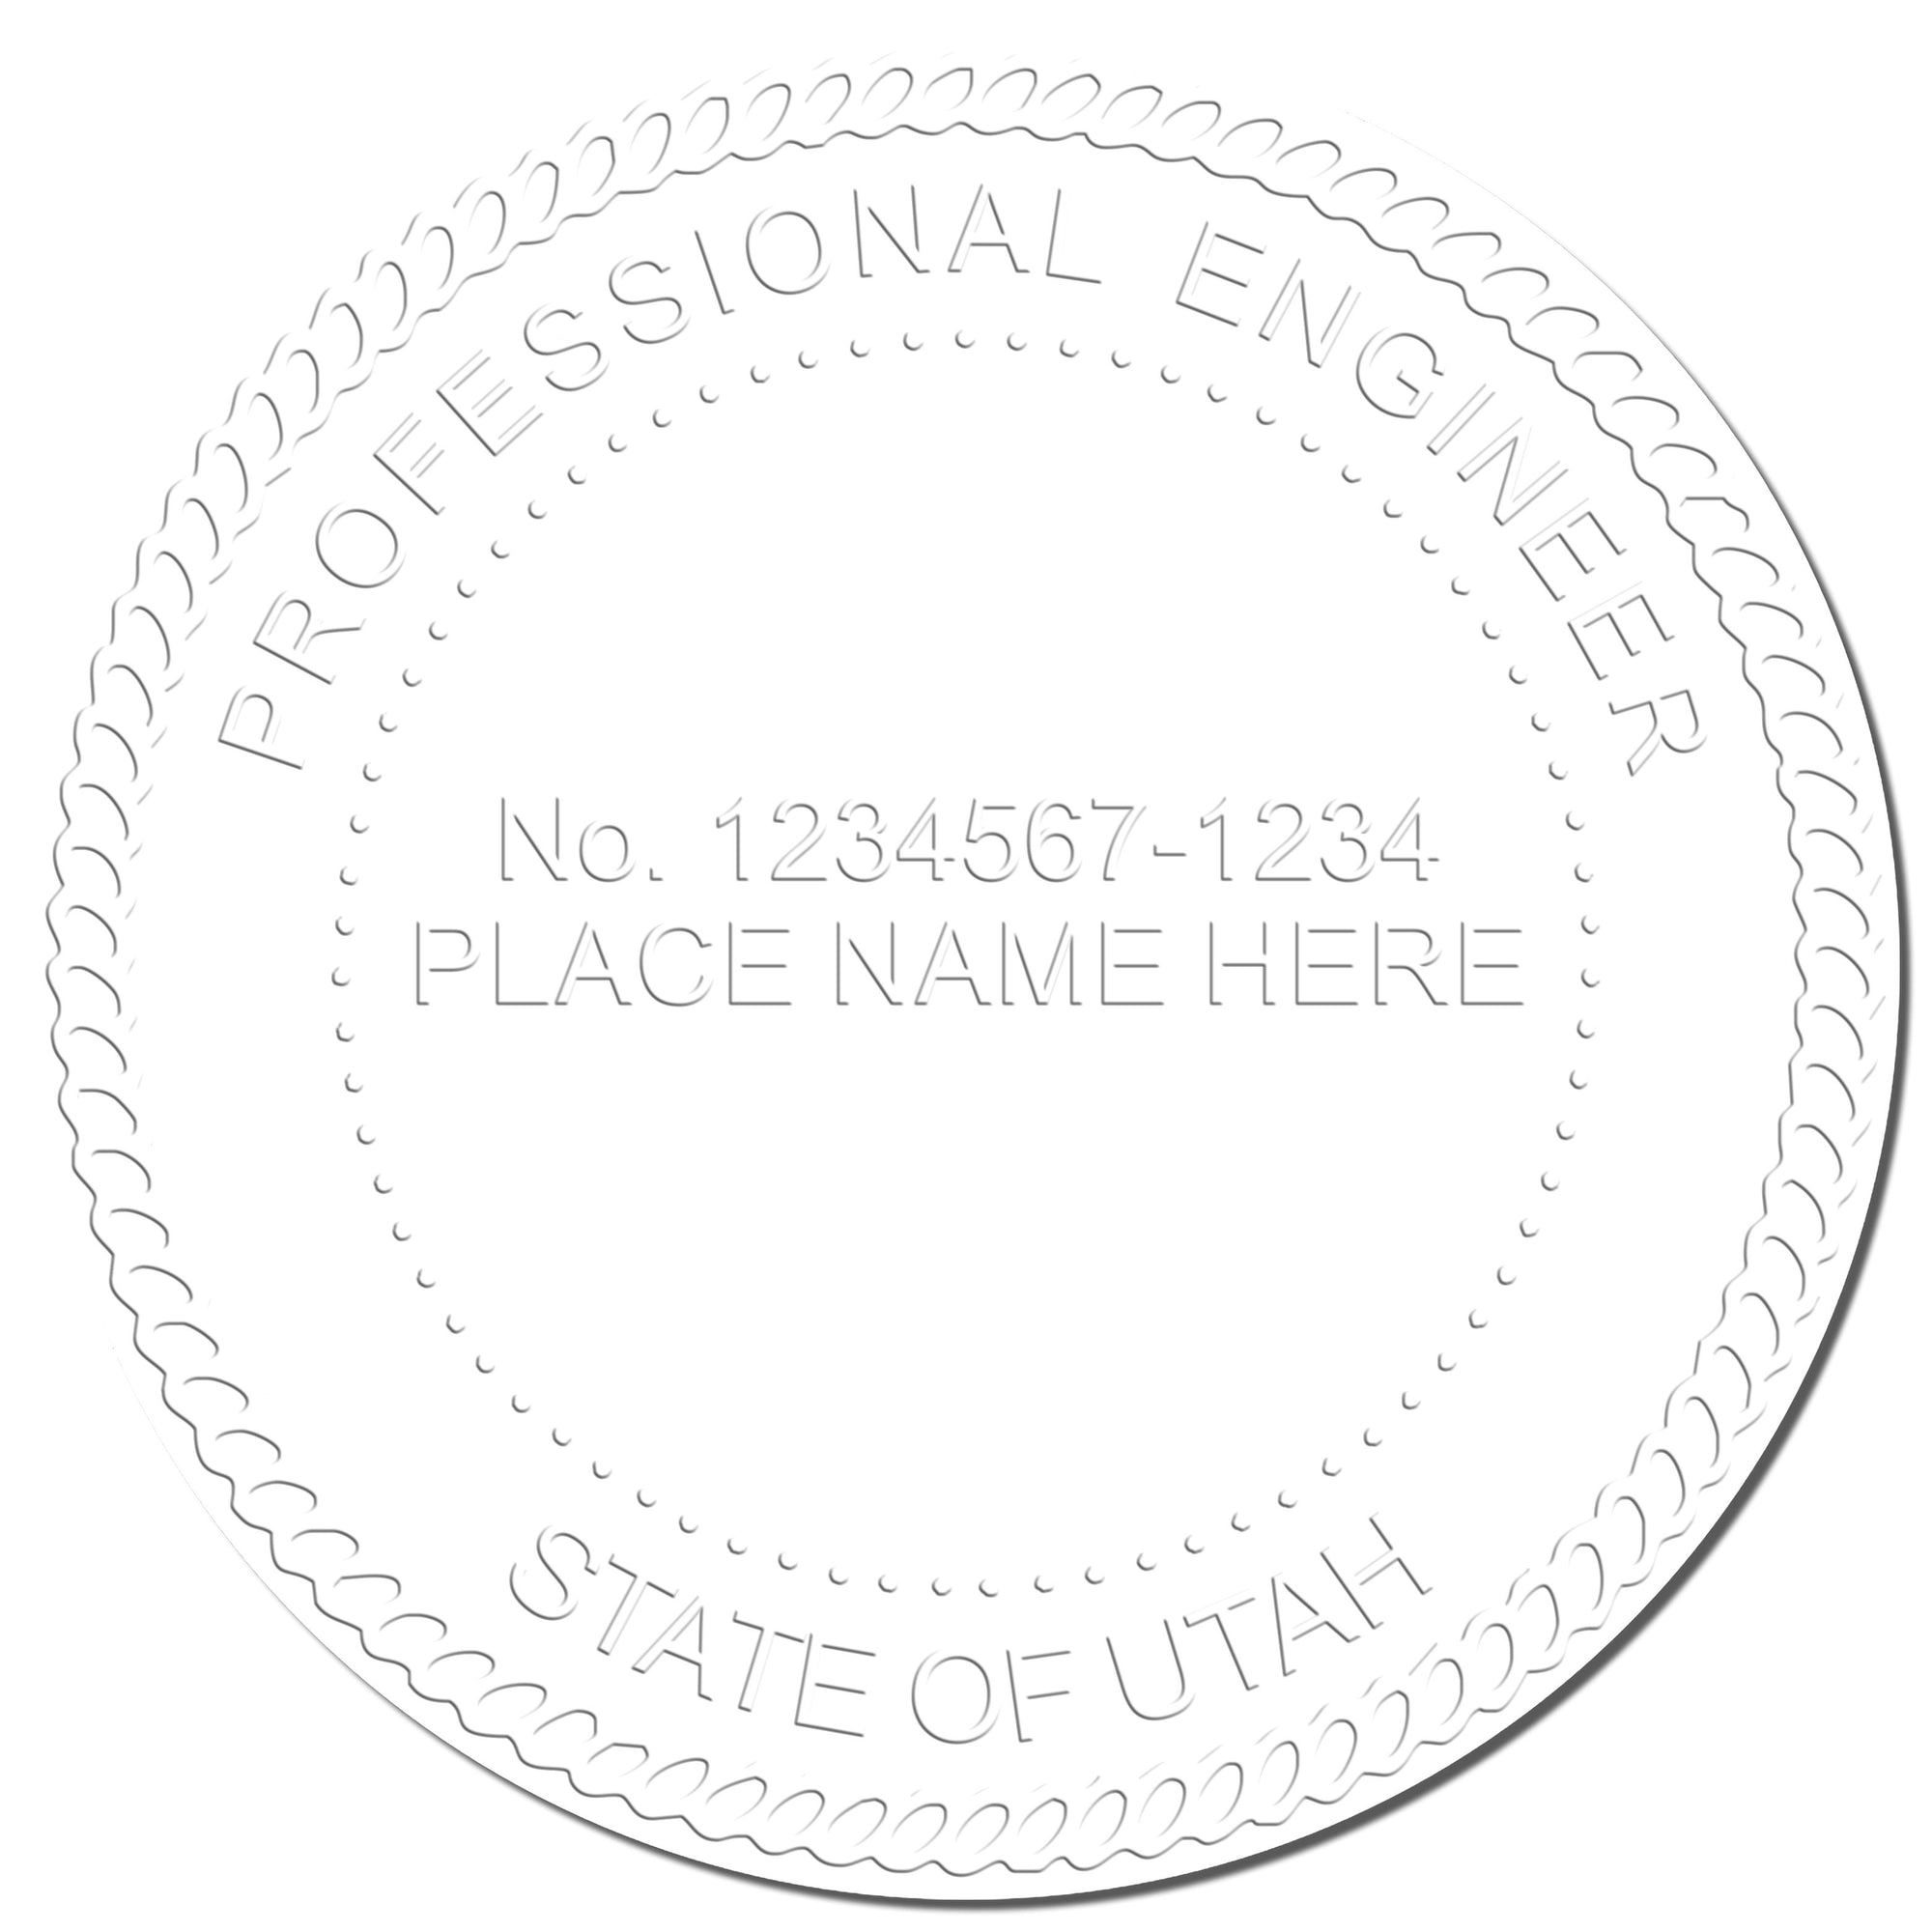 The main image for the Utah Engineer Desk Seal depicting a sample of the imprint and electronic files